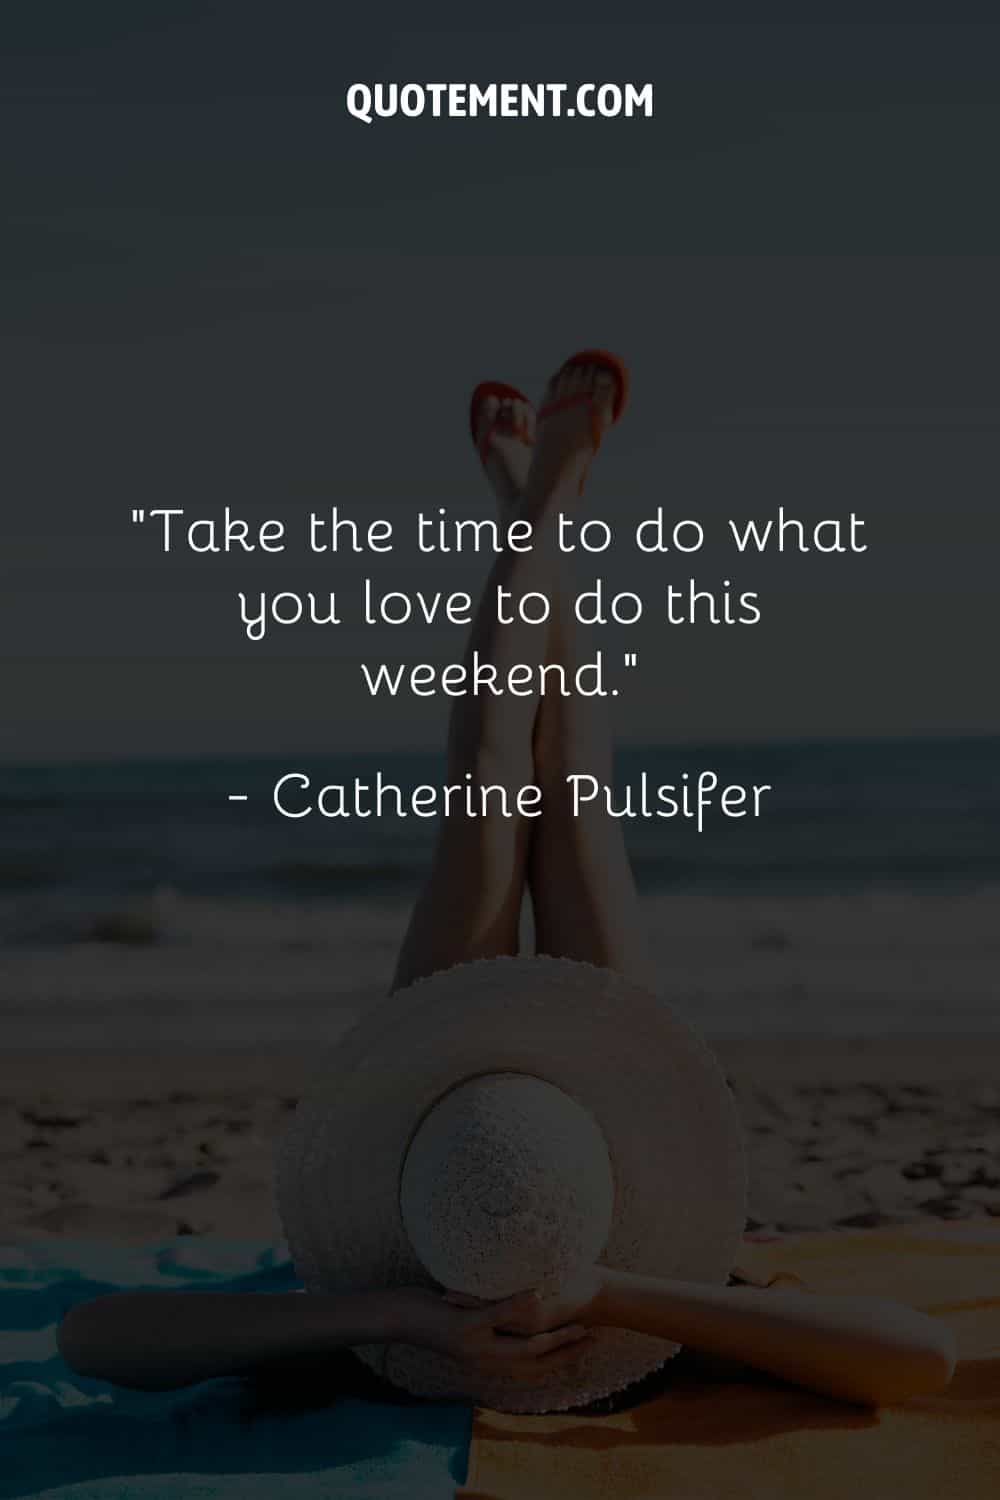 Take the time to do what you love to do this weekend